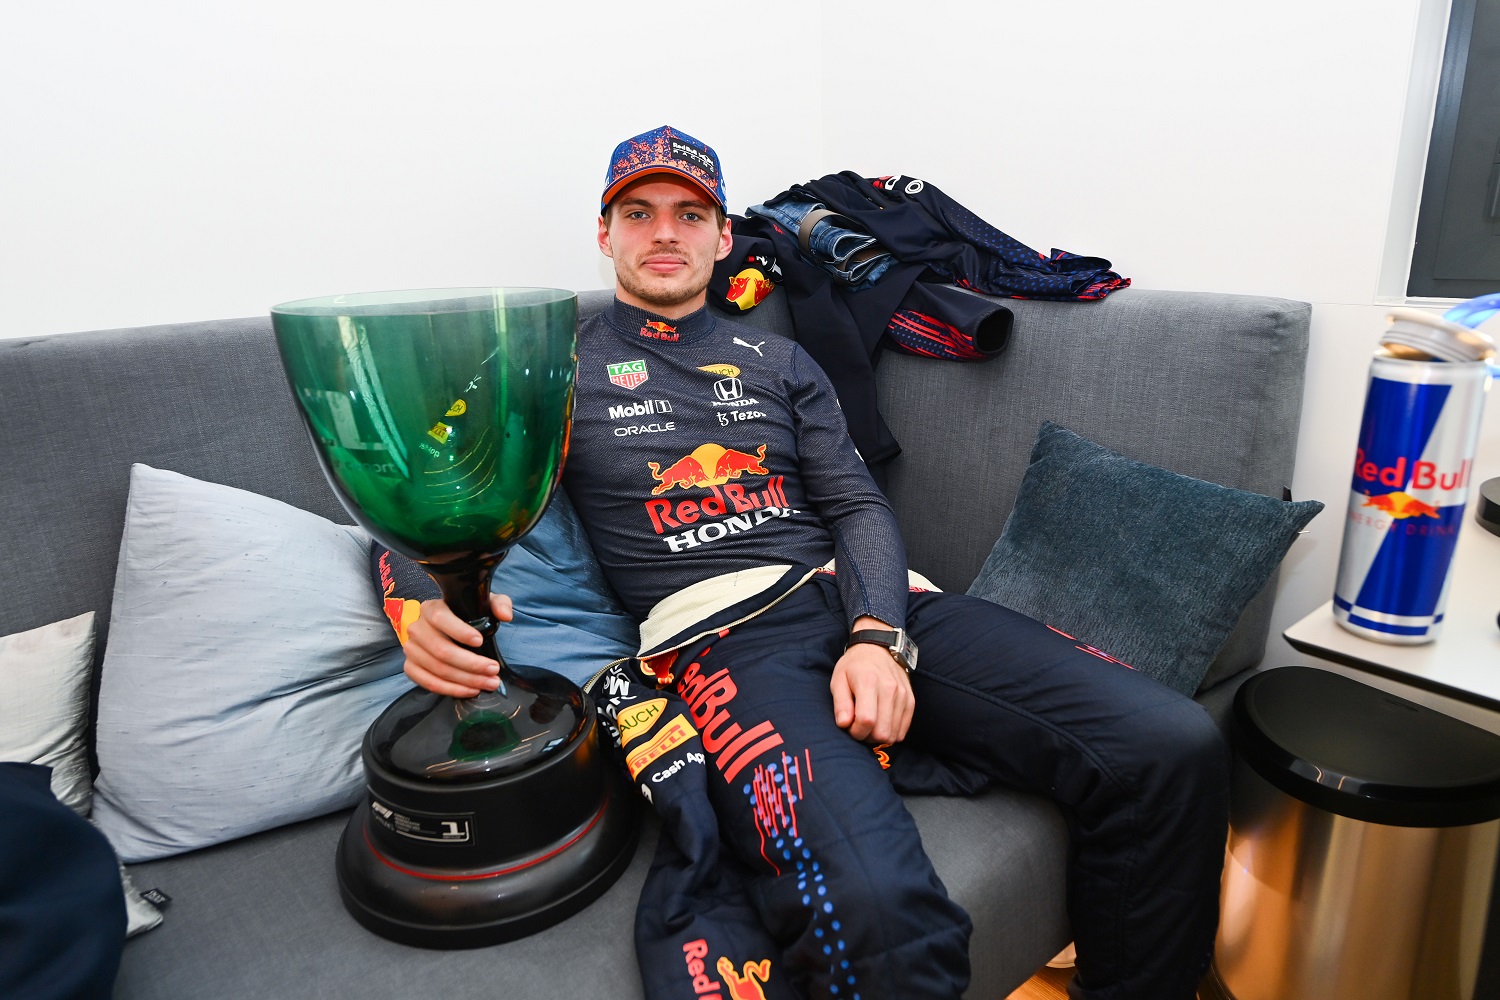 Max Verstappen of Red Bull Racing poses with his trophy after the Formula 1 Grand Prix of The Netherlands at Circuit Zandvoort on Sept. 5, 2021.